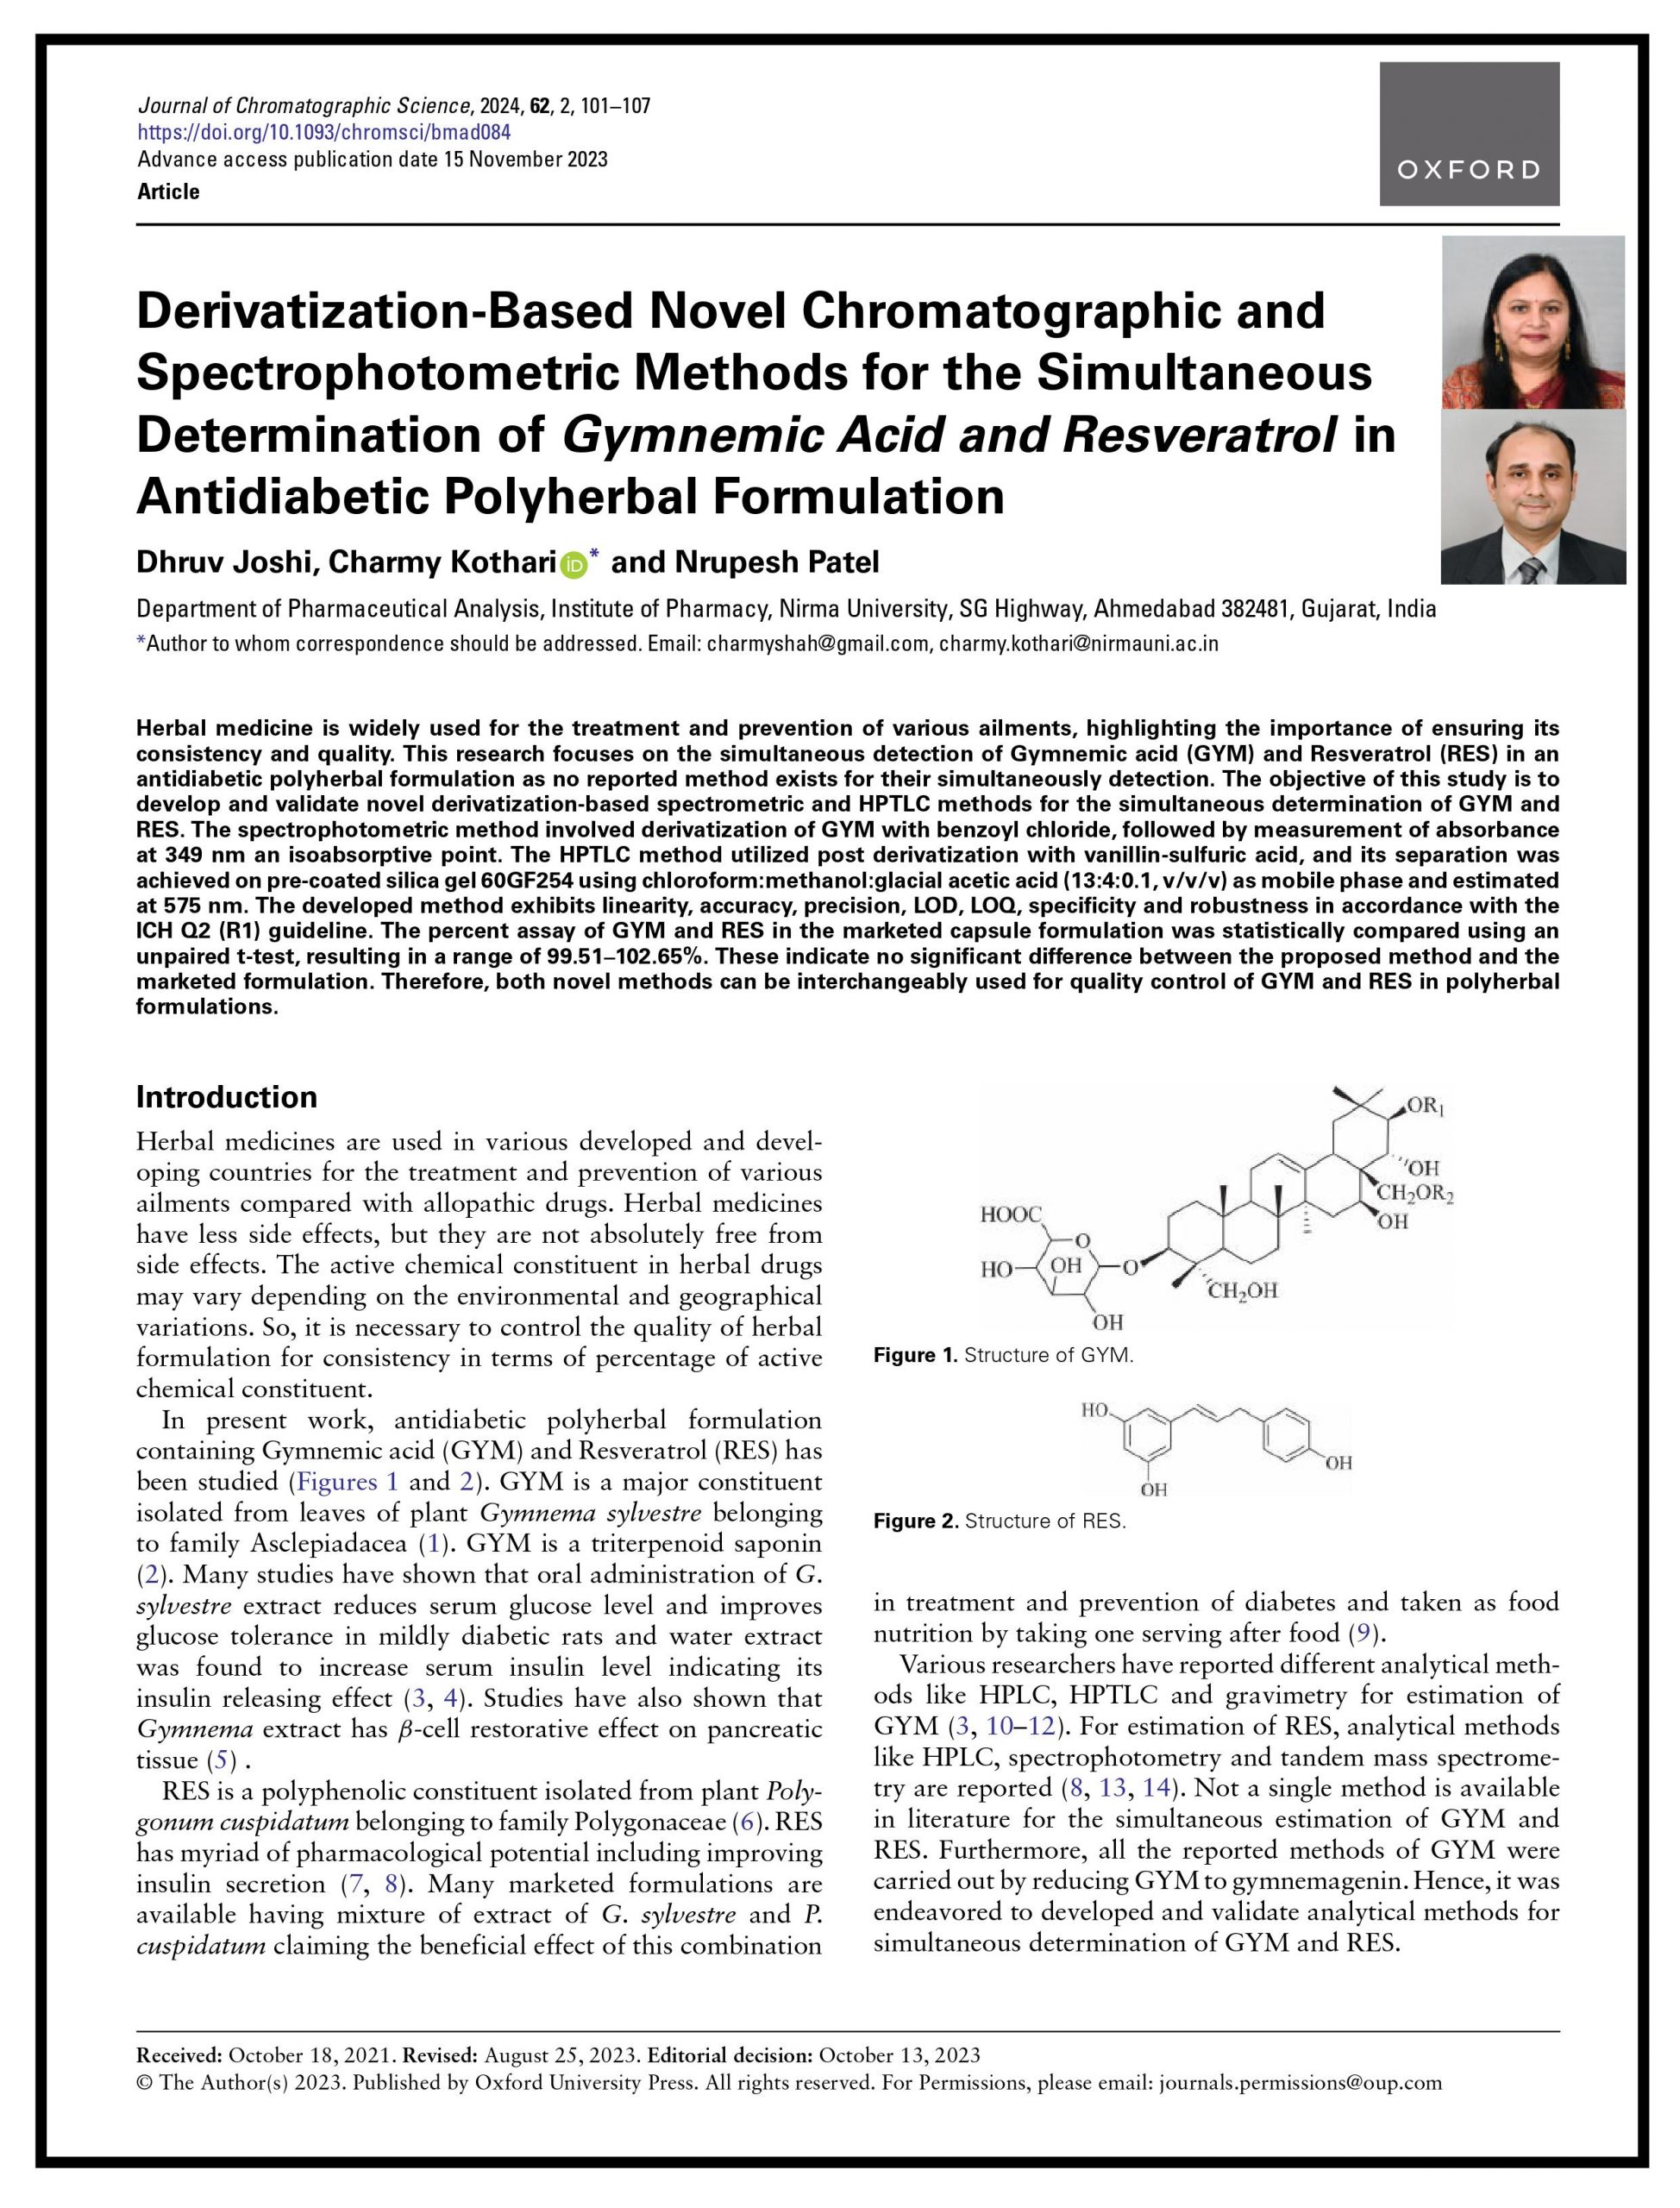 Derivatization-Based Novel Chromatographic and Spectrophotometric Methods for the Simultaneous Determination of Gymnemic Acid and Resveratrol in Antidiabetic Polyherbal Formulation